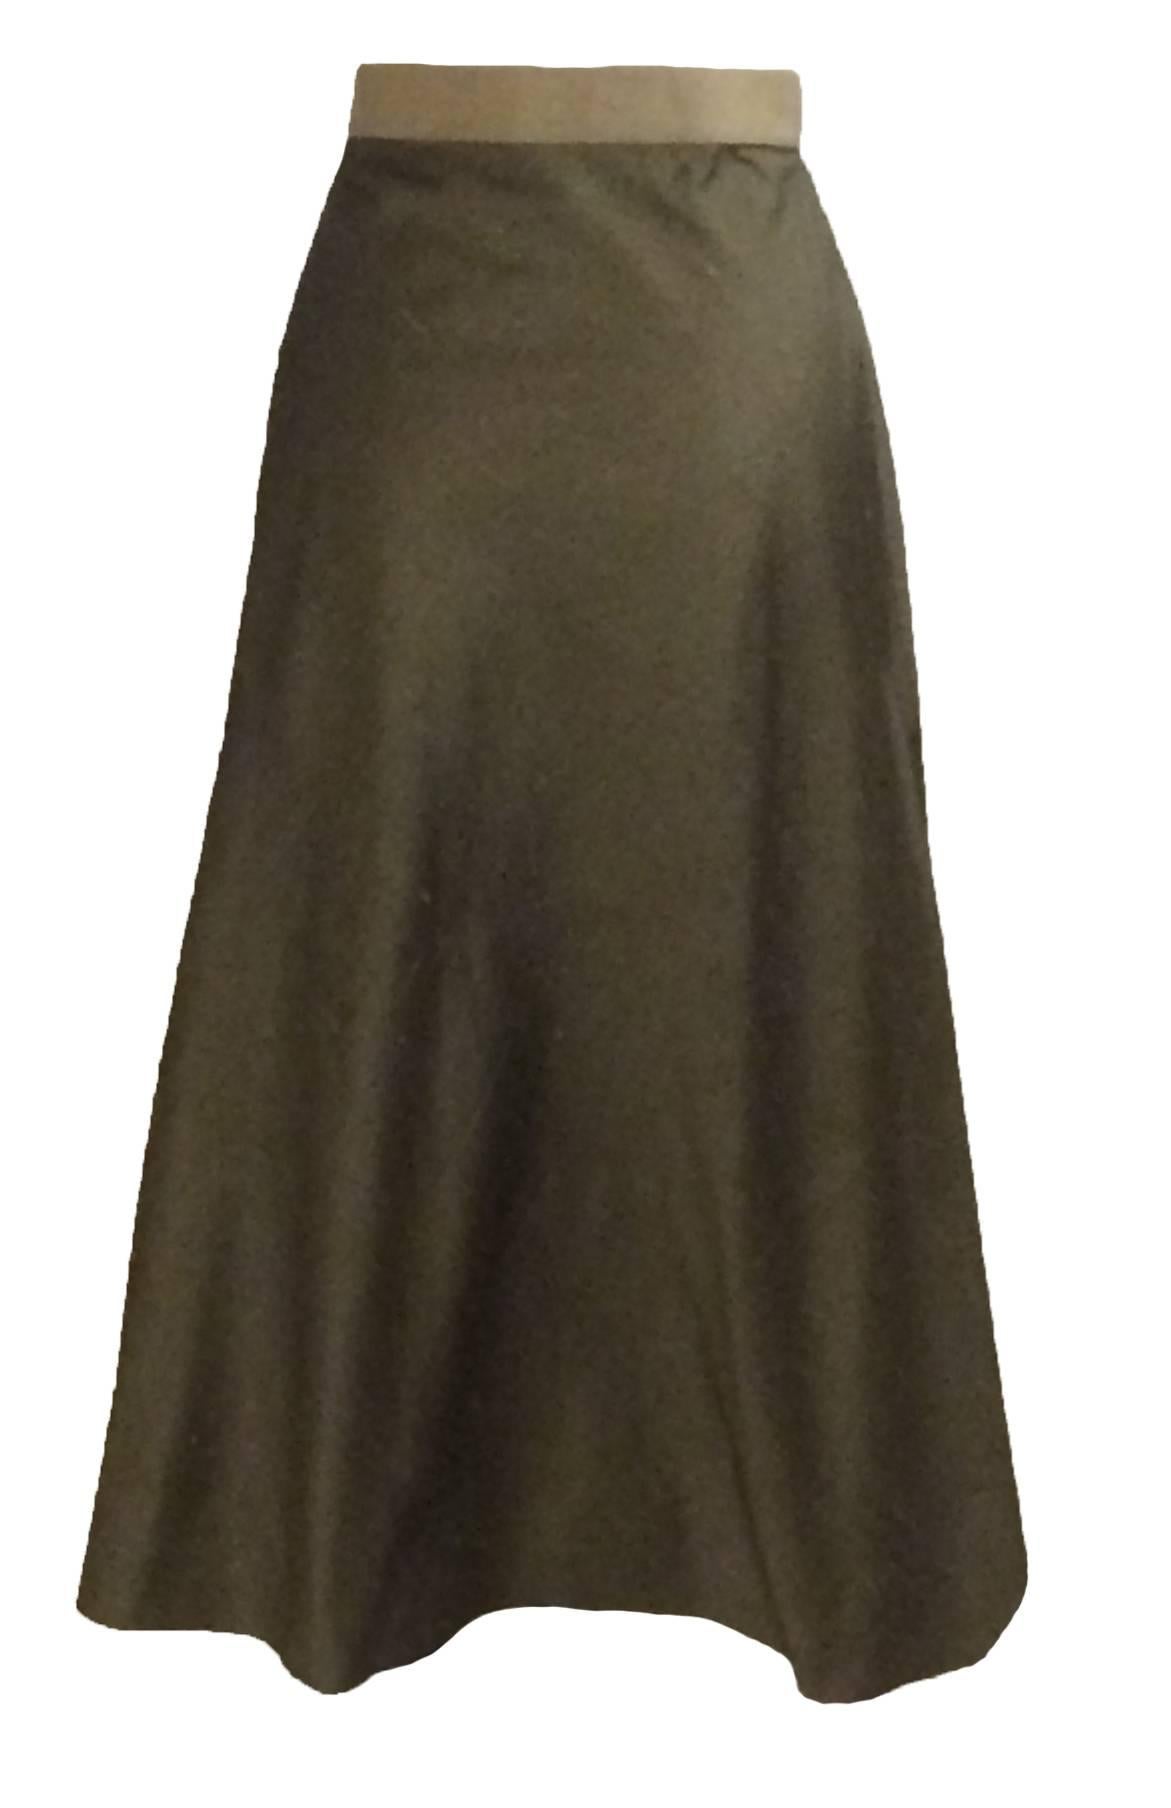 
Chloe green silk midi skirt with grosgrain band at waist. A-Line cut and gold zip detail at side. 

100% silk. 

French 42, approximate US 10. 
Waist 29